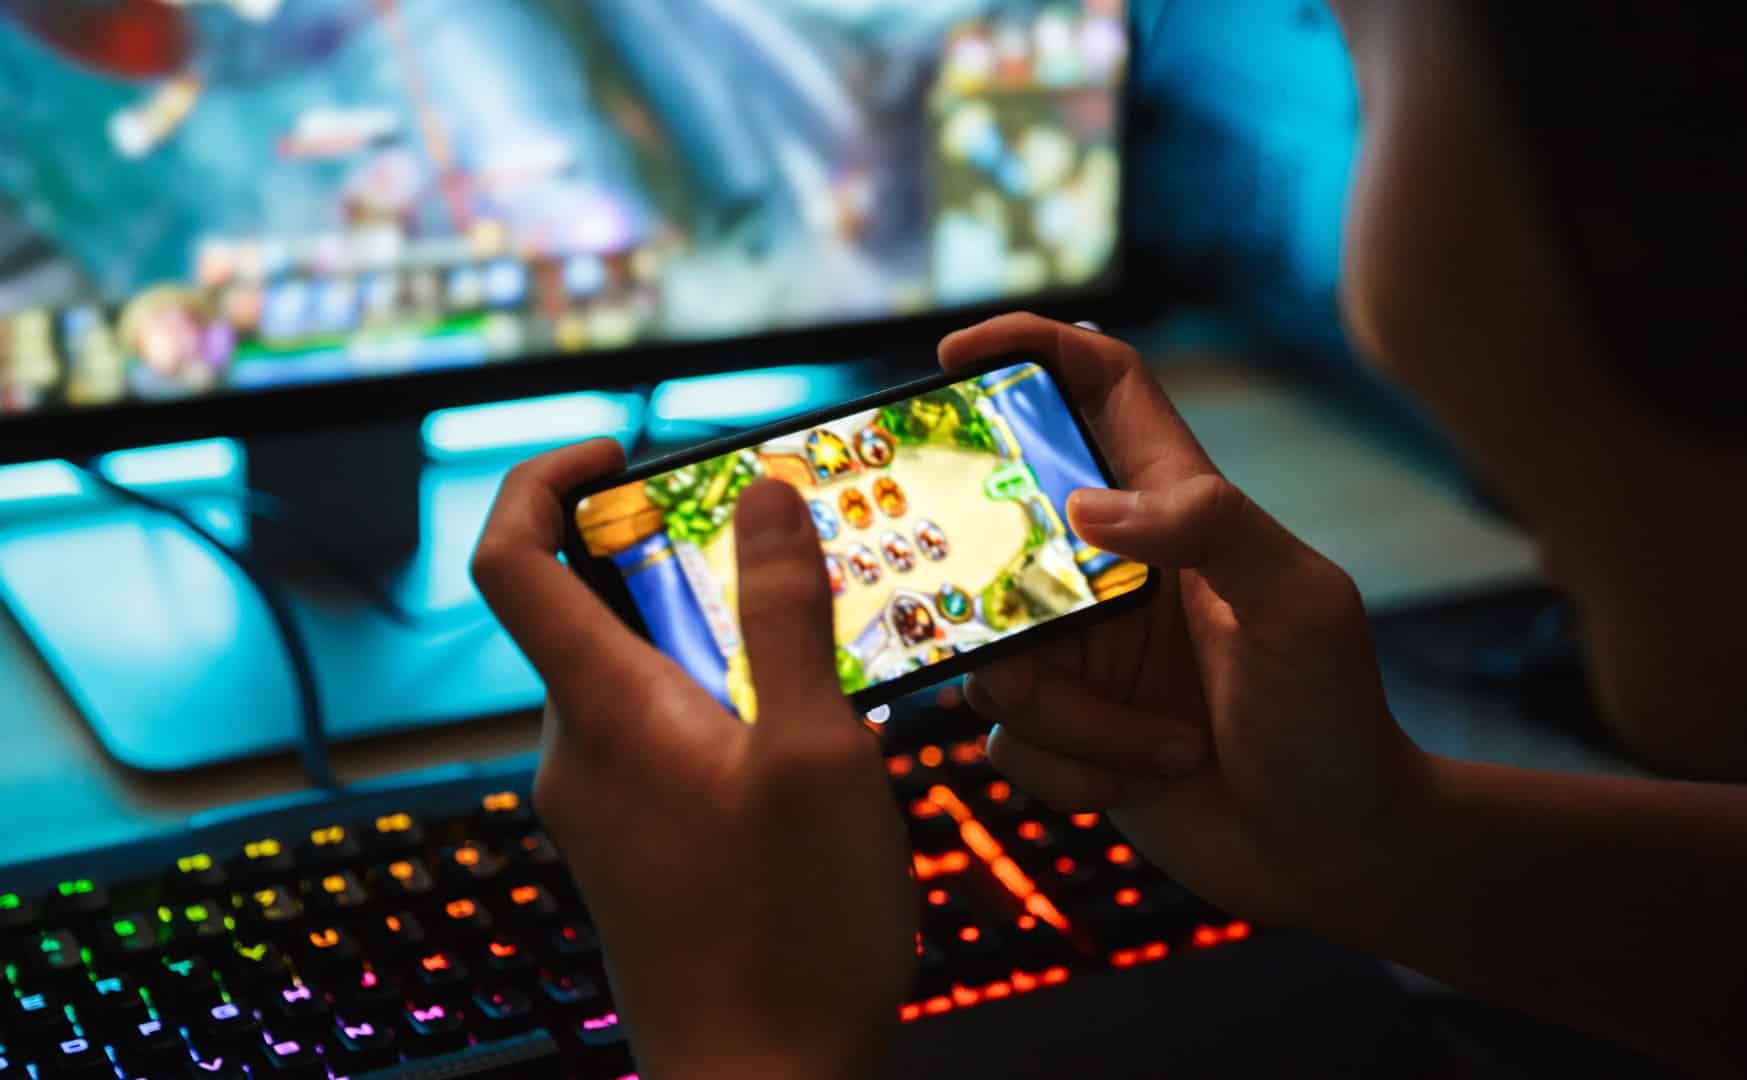 BBB Online Gaming Has Increased Risk of Scammers by Targeting Children